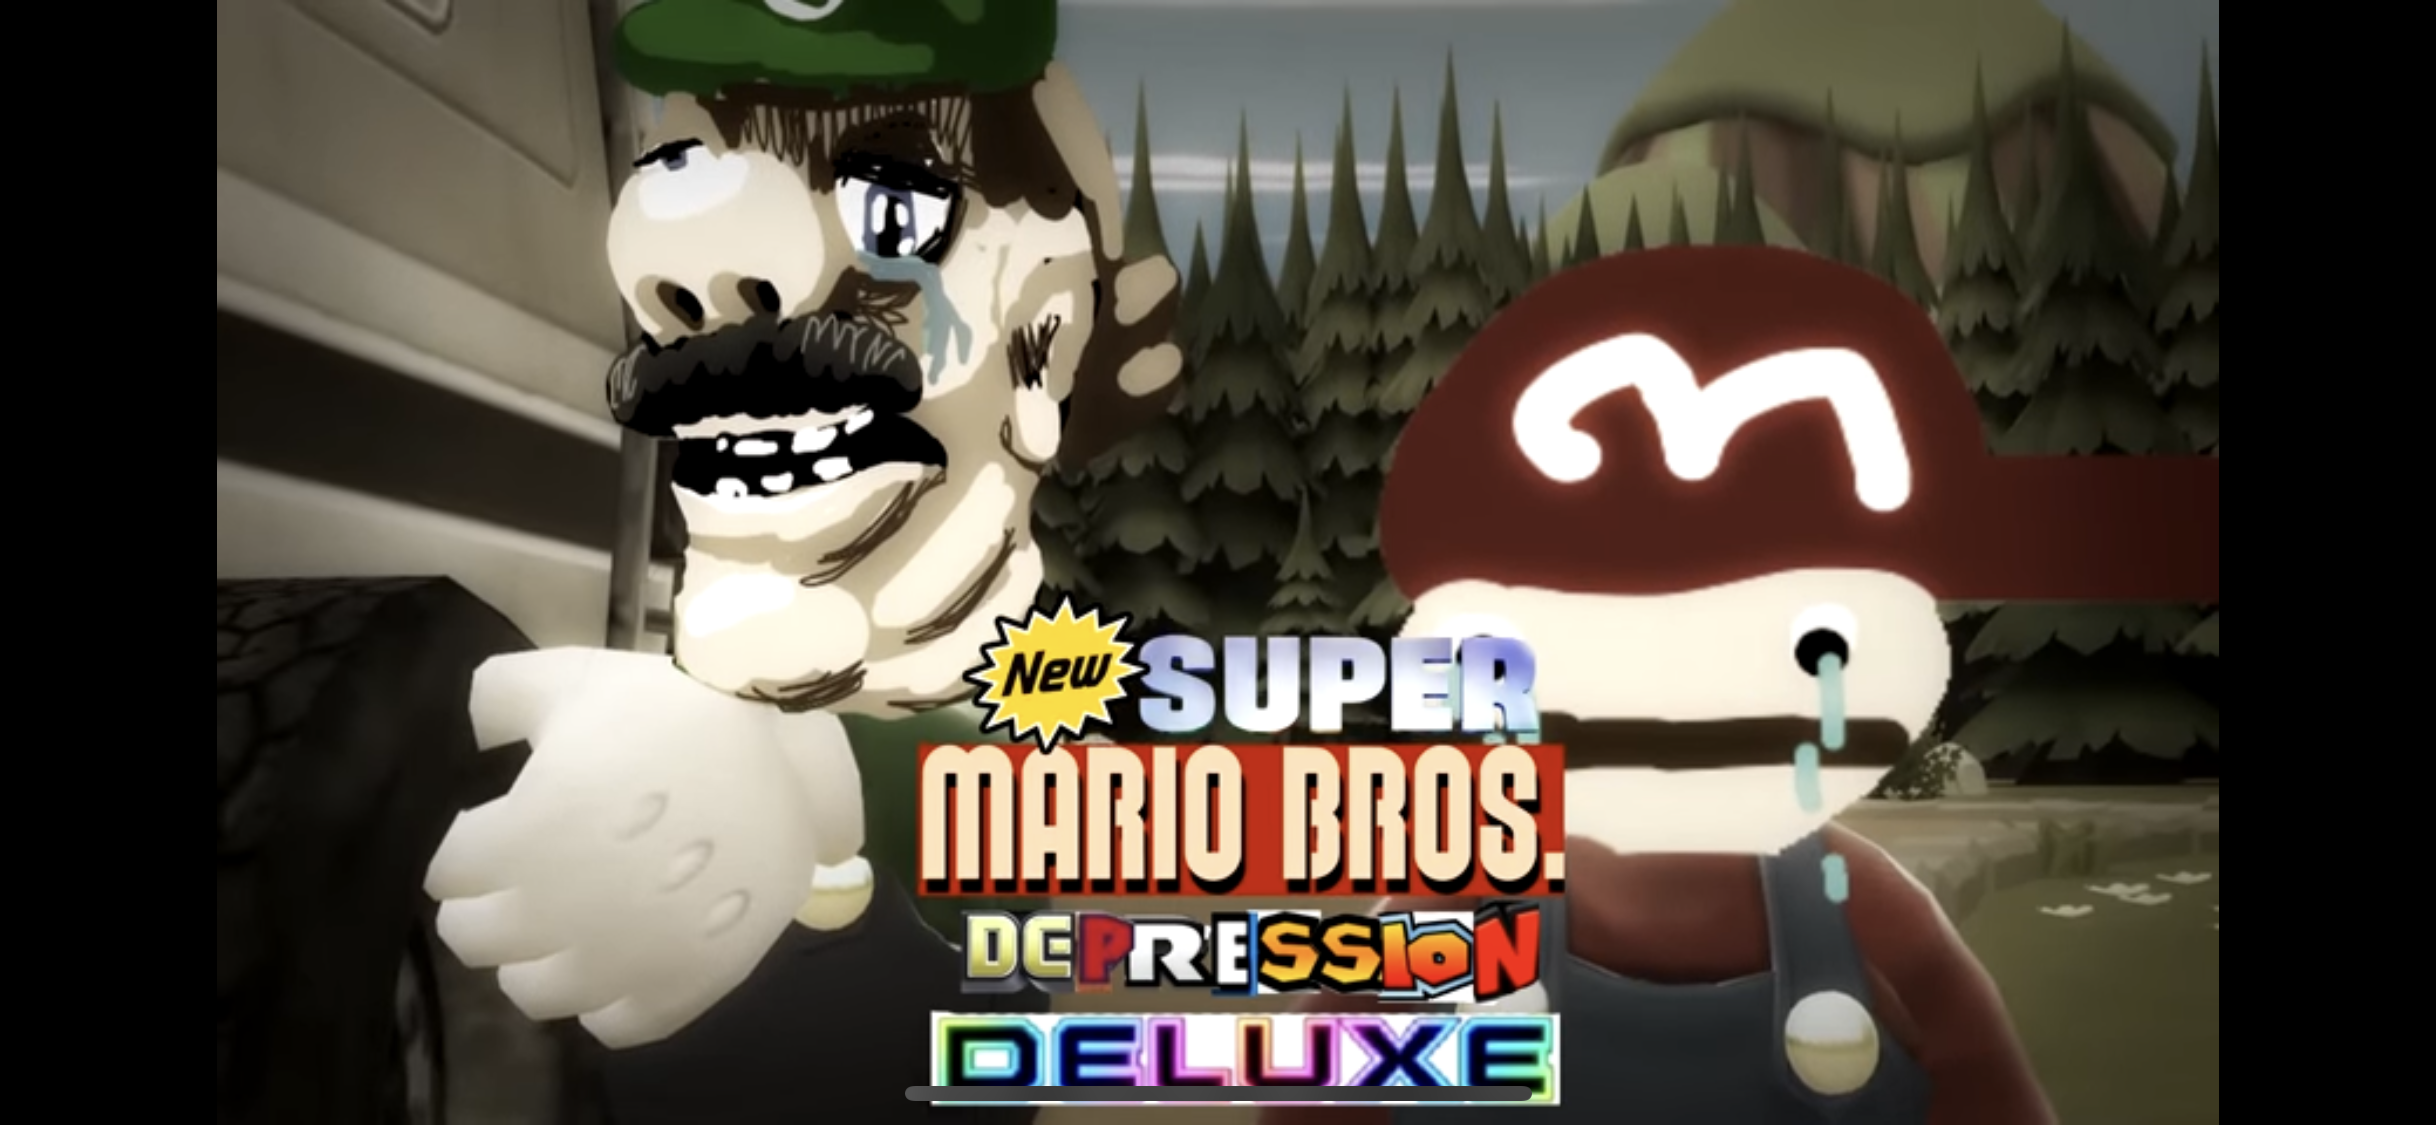 High Quality Super Mario Bros Depression Deluxe Blank Meme Template